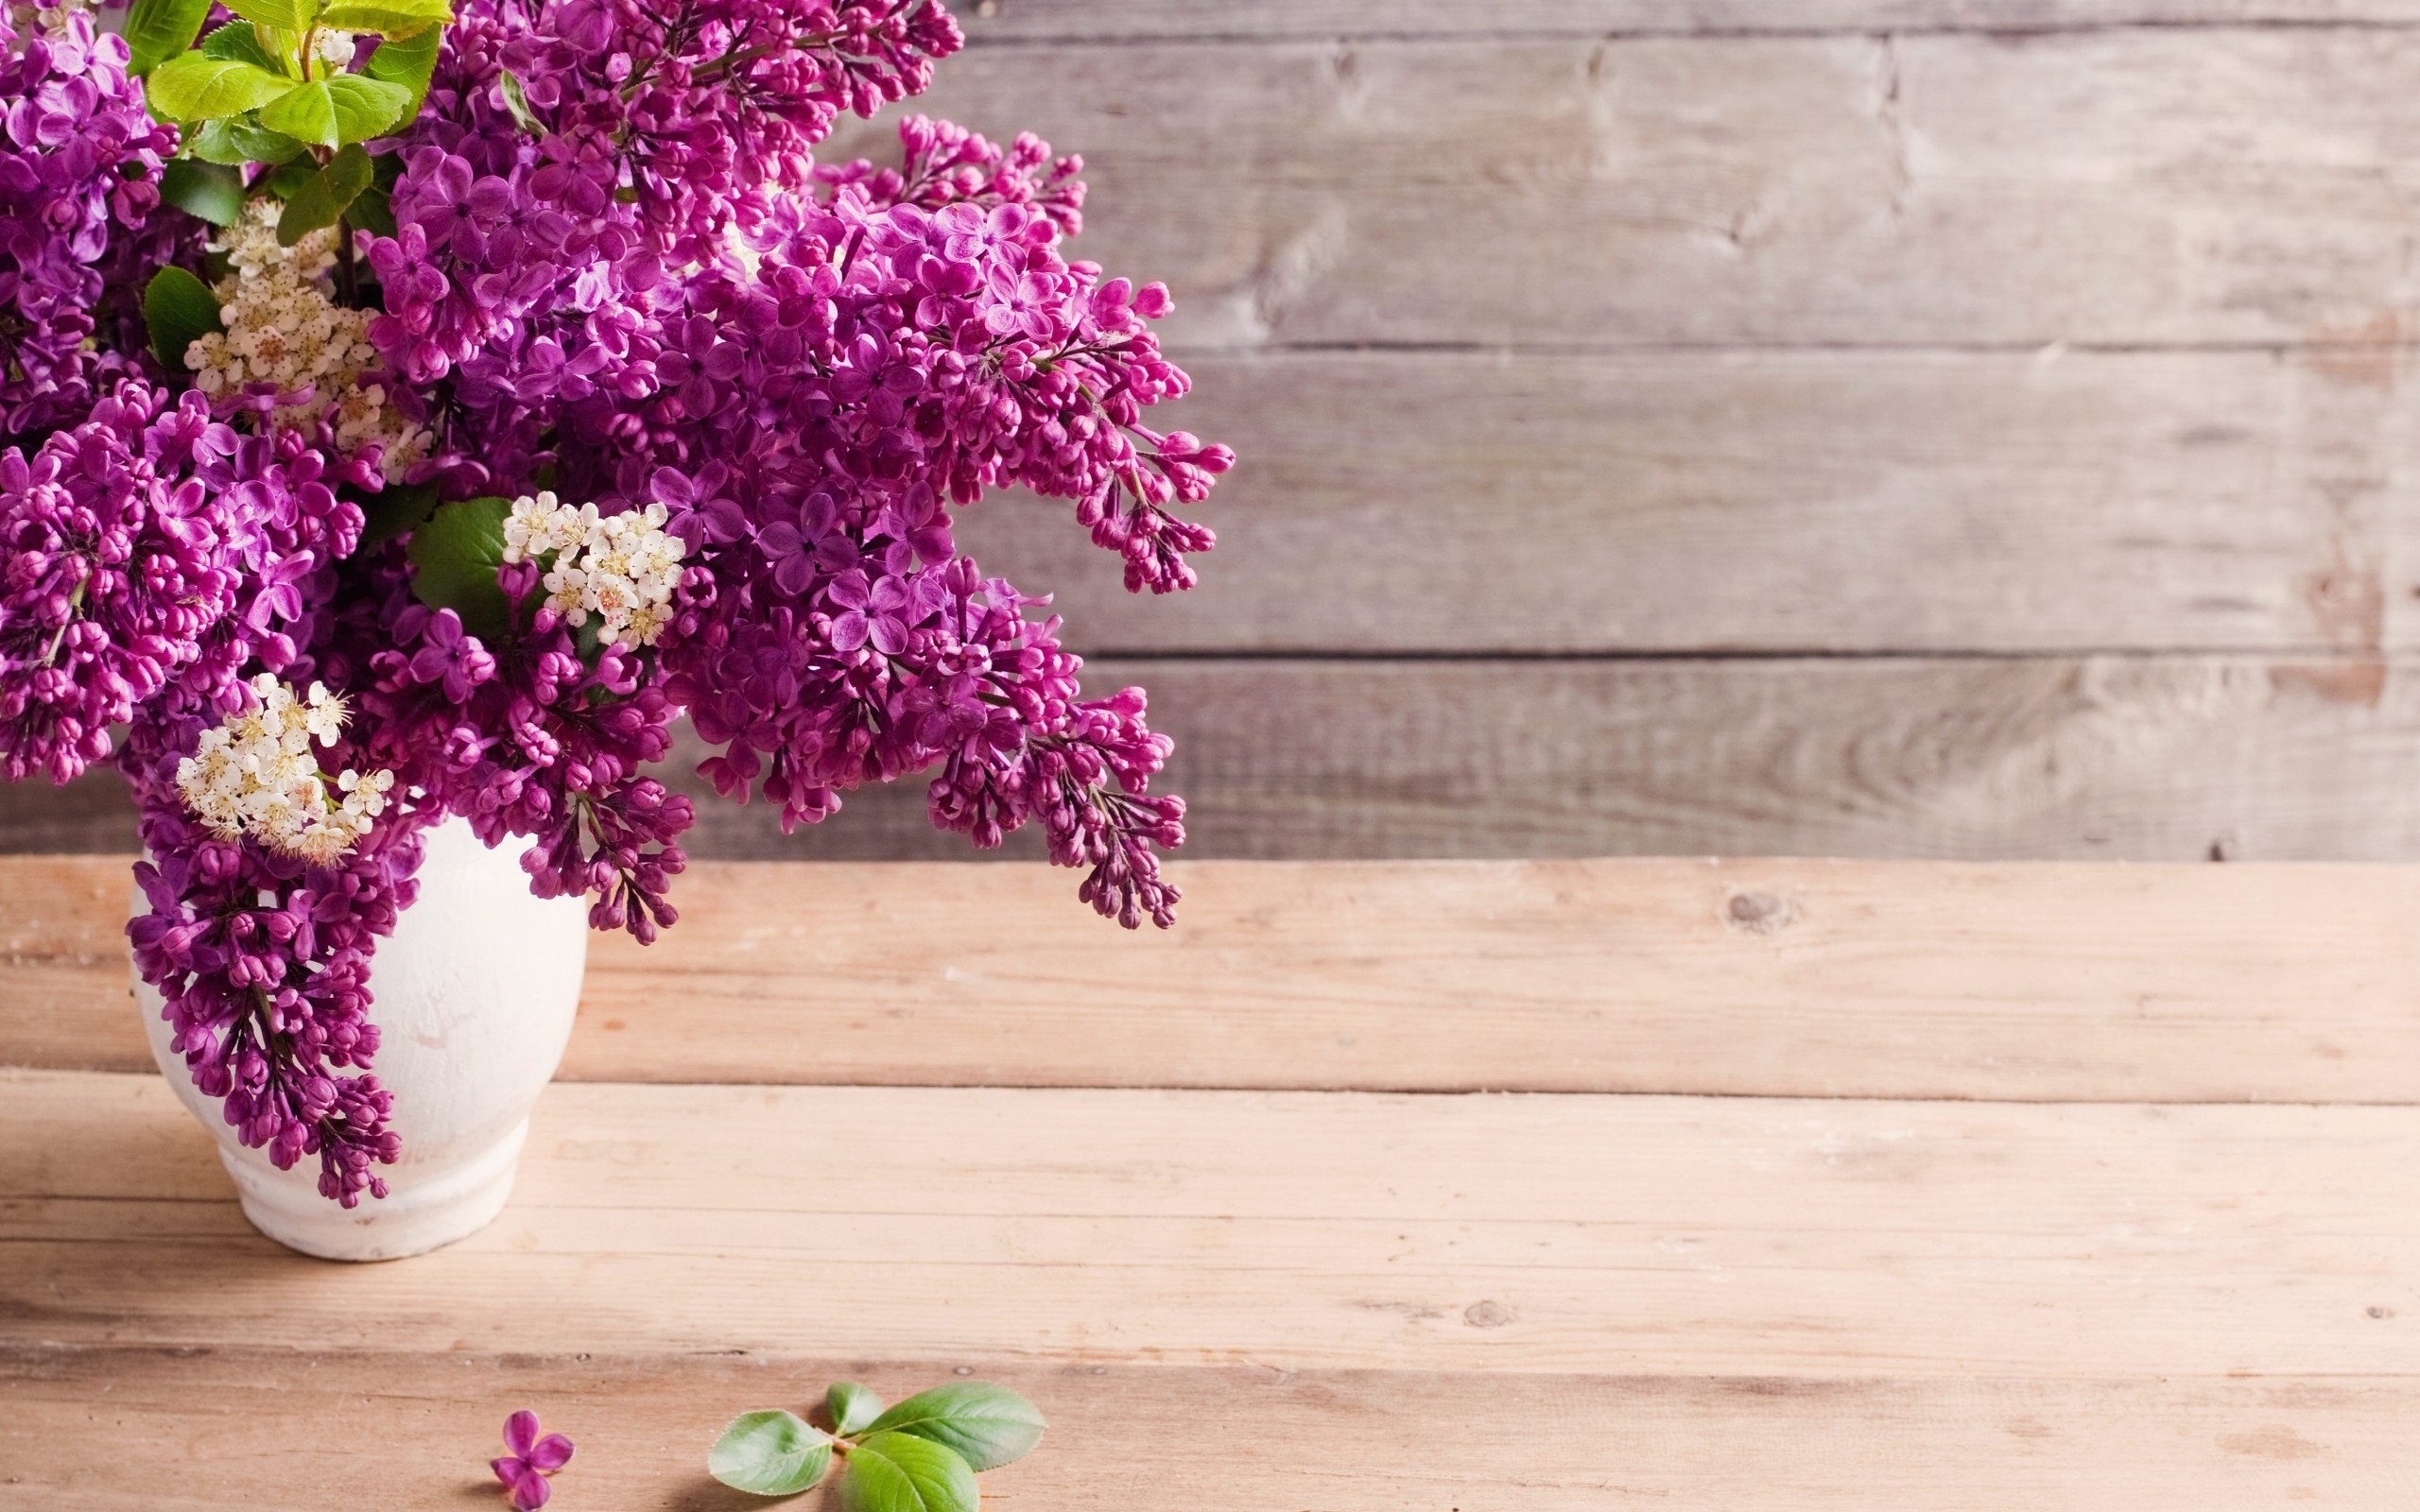 2560x1600 Flowers lilac vases wooden planks wallpaper |  | 258907 |  WallpaperUP